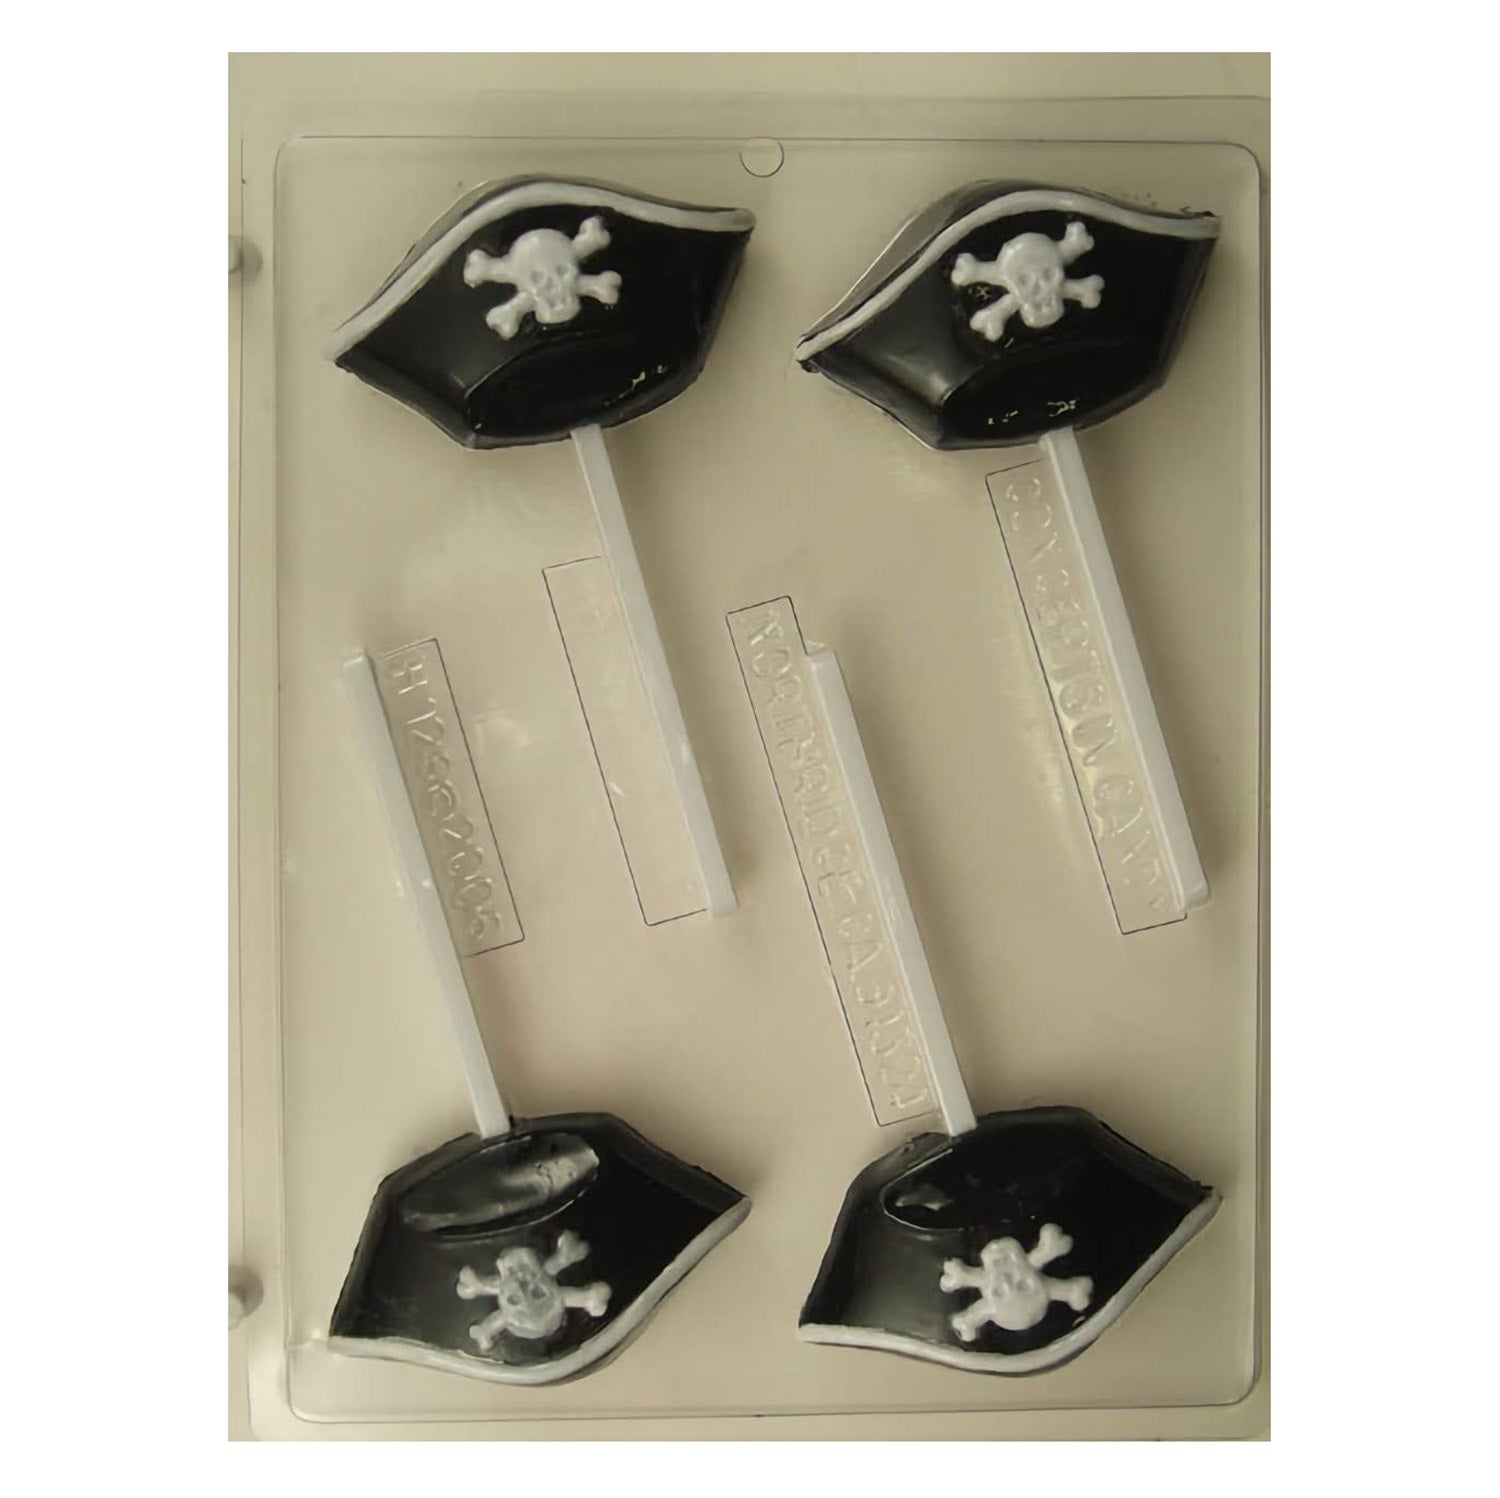 A fun, pirate-themed chocolate mold with three cavities shaped like pirate hats, complete with a skull and crossbones emblem. Each cavity is equipped with a stick insert for creating chocolate lollipop treats.